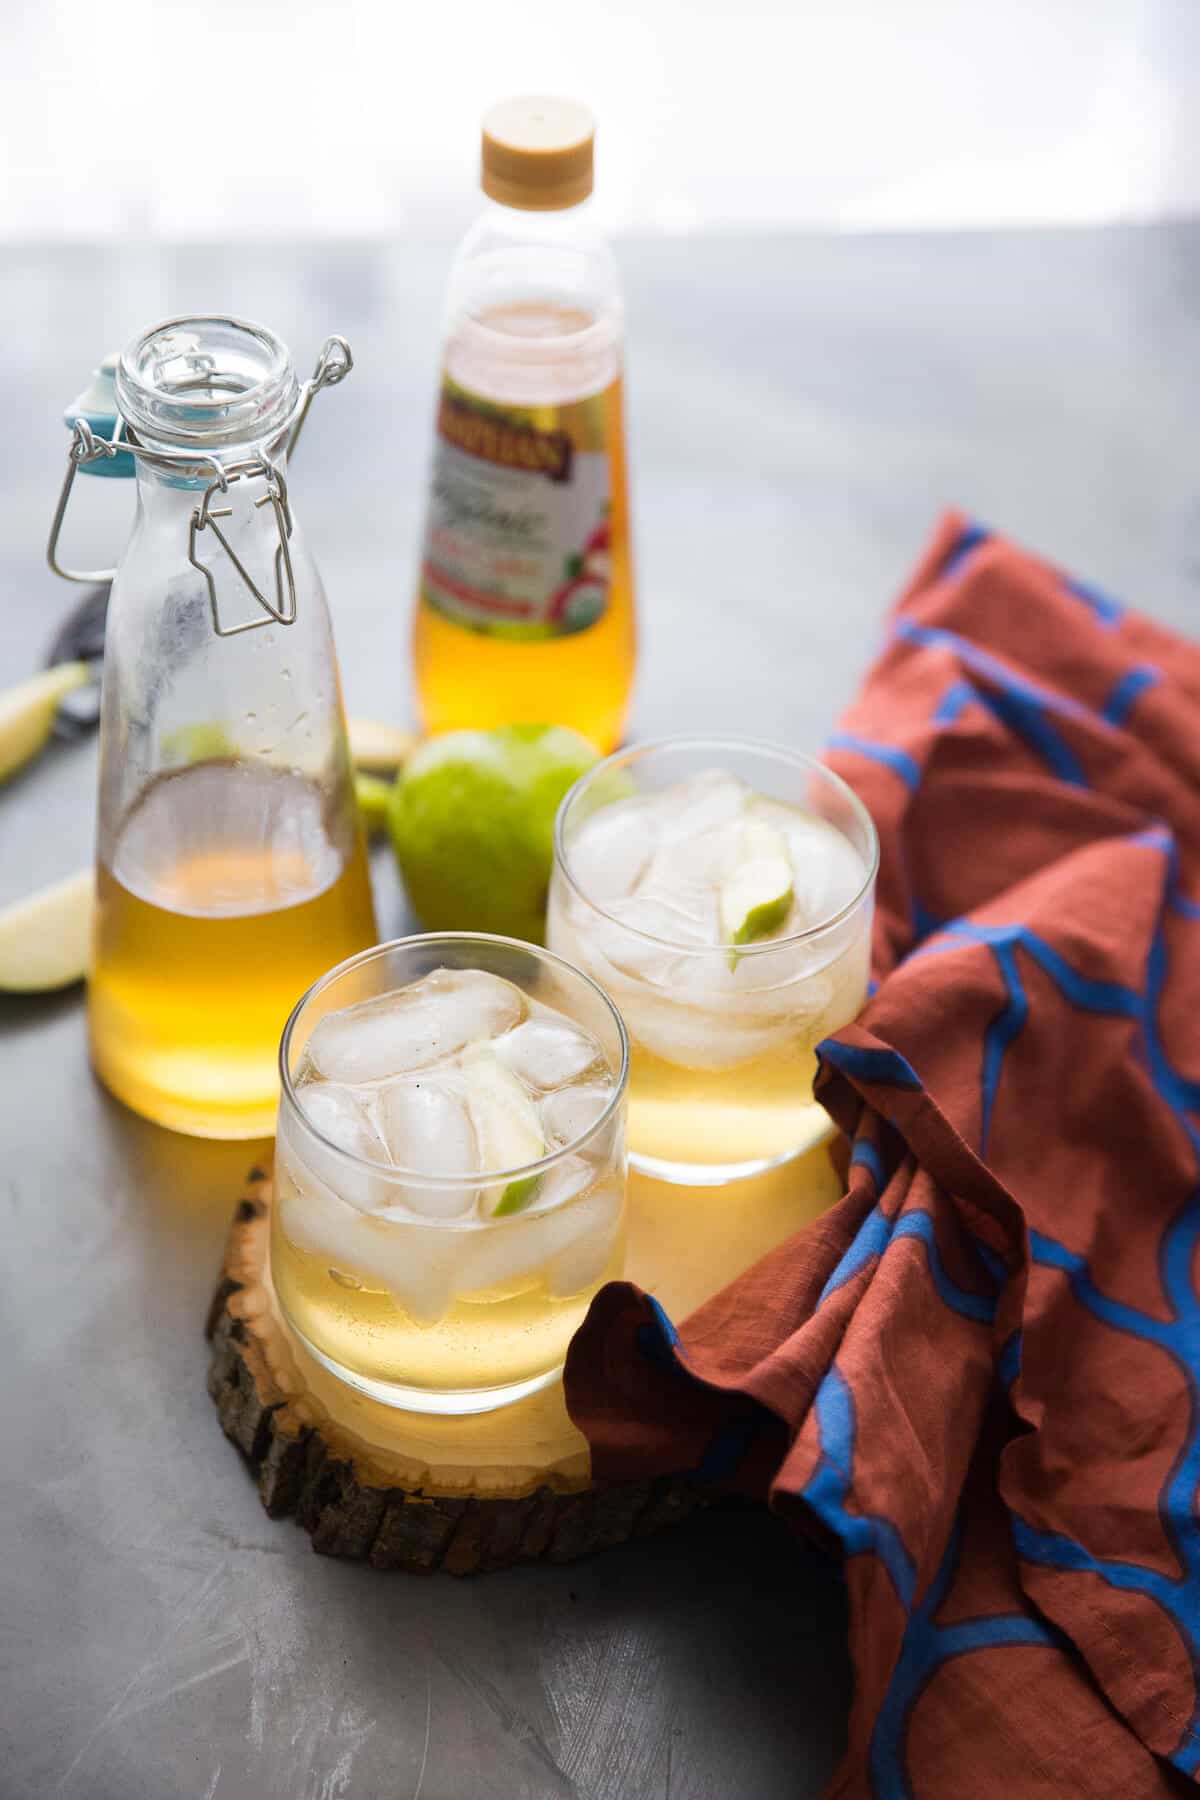 This fruit shrub recipe is crisp, sweet and refreshing. You don't often think of cider vinegar as a beverage ingredient, but it really enhances the flavor of fruity drinks. Plus shrub is just fun to say!